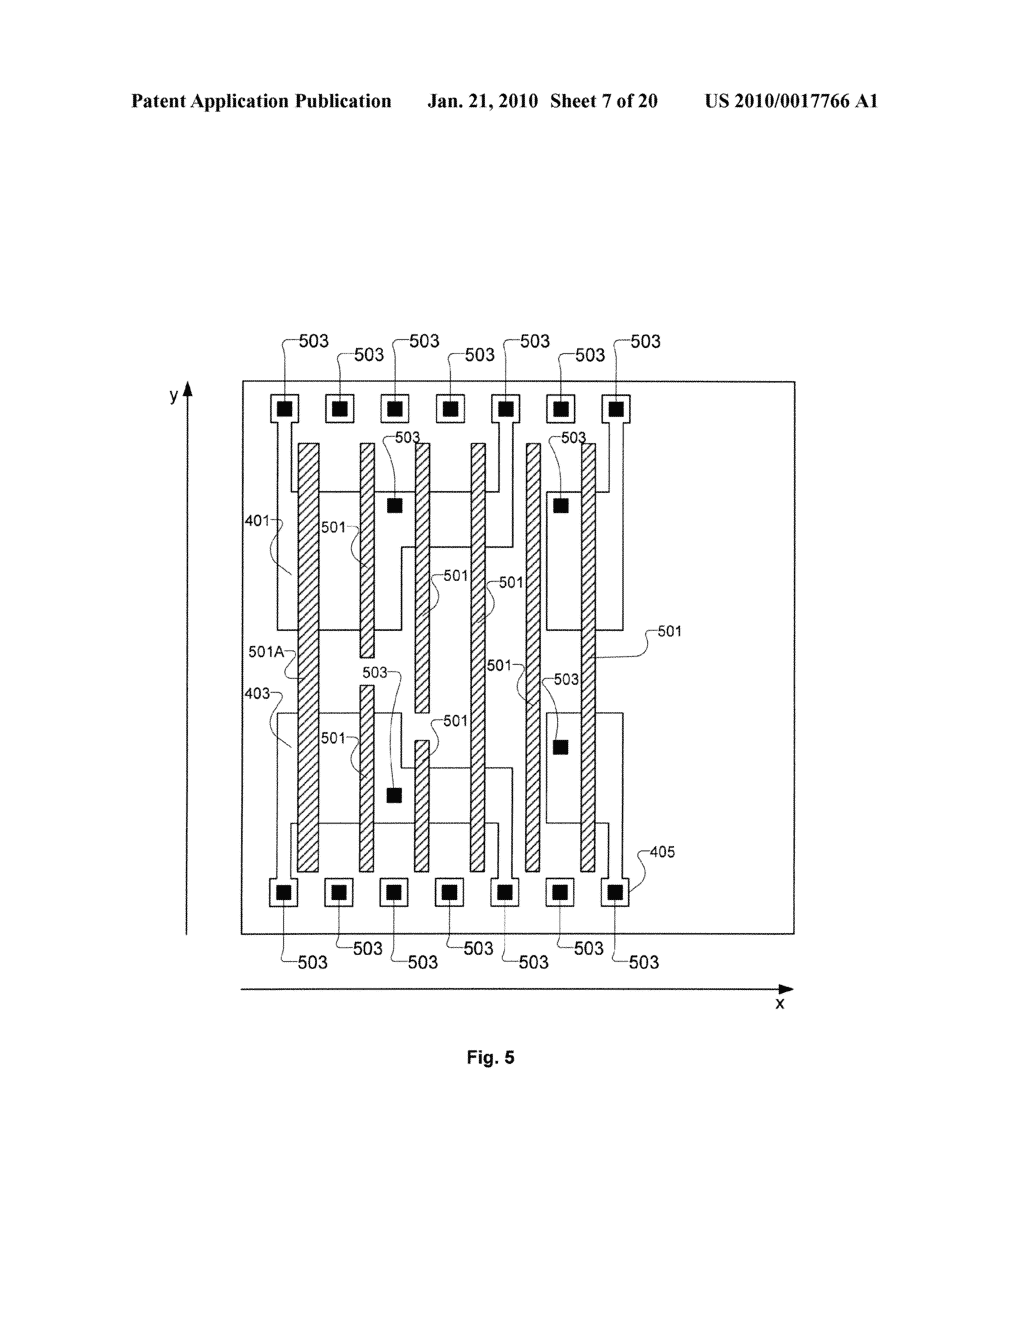 Semiconductor Device Layout Including Cell Layout Having Restricted Gate Electrode Level Layout with Linear Shaped Gate Electrode Layout Features Defined with Minimum End-to-End Spacing and At Least Eight Transistors - diagram, schematic, and image 08